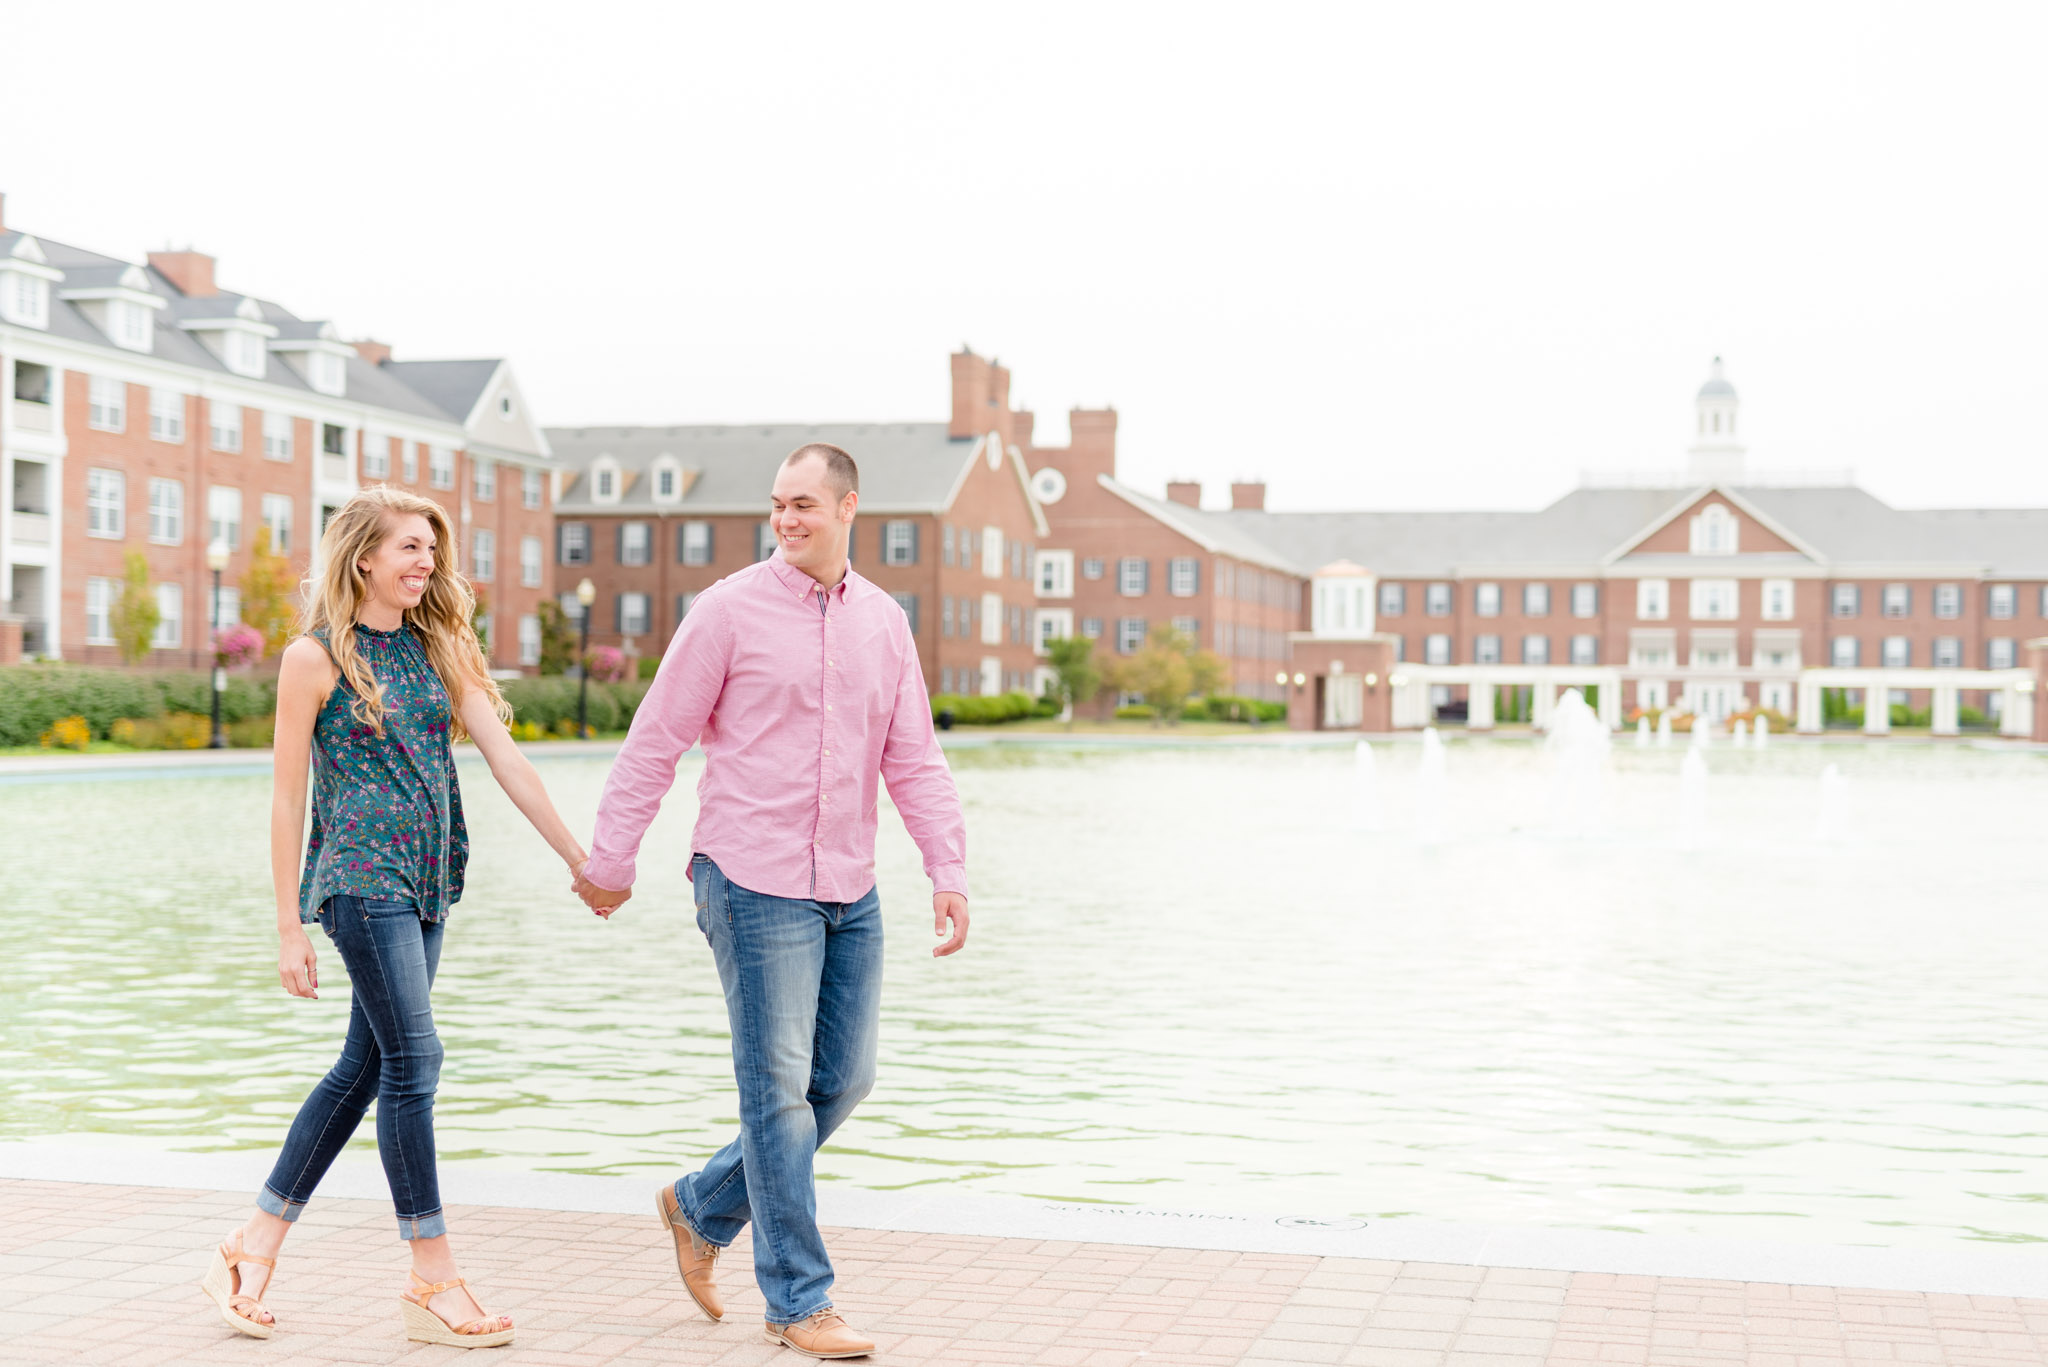 Engaged bride and groom walk in front of large building and water.